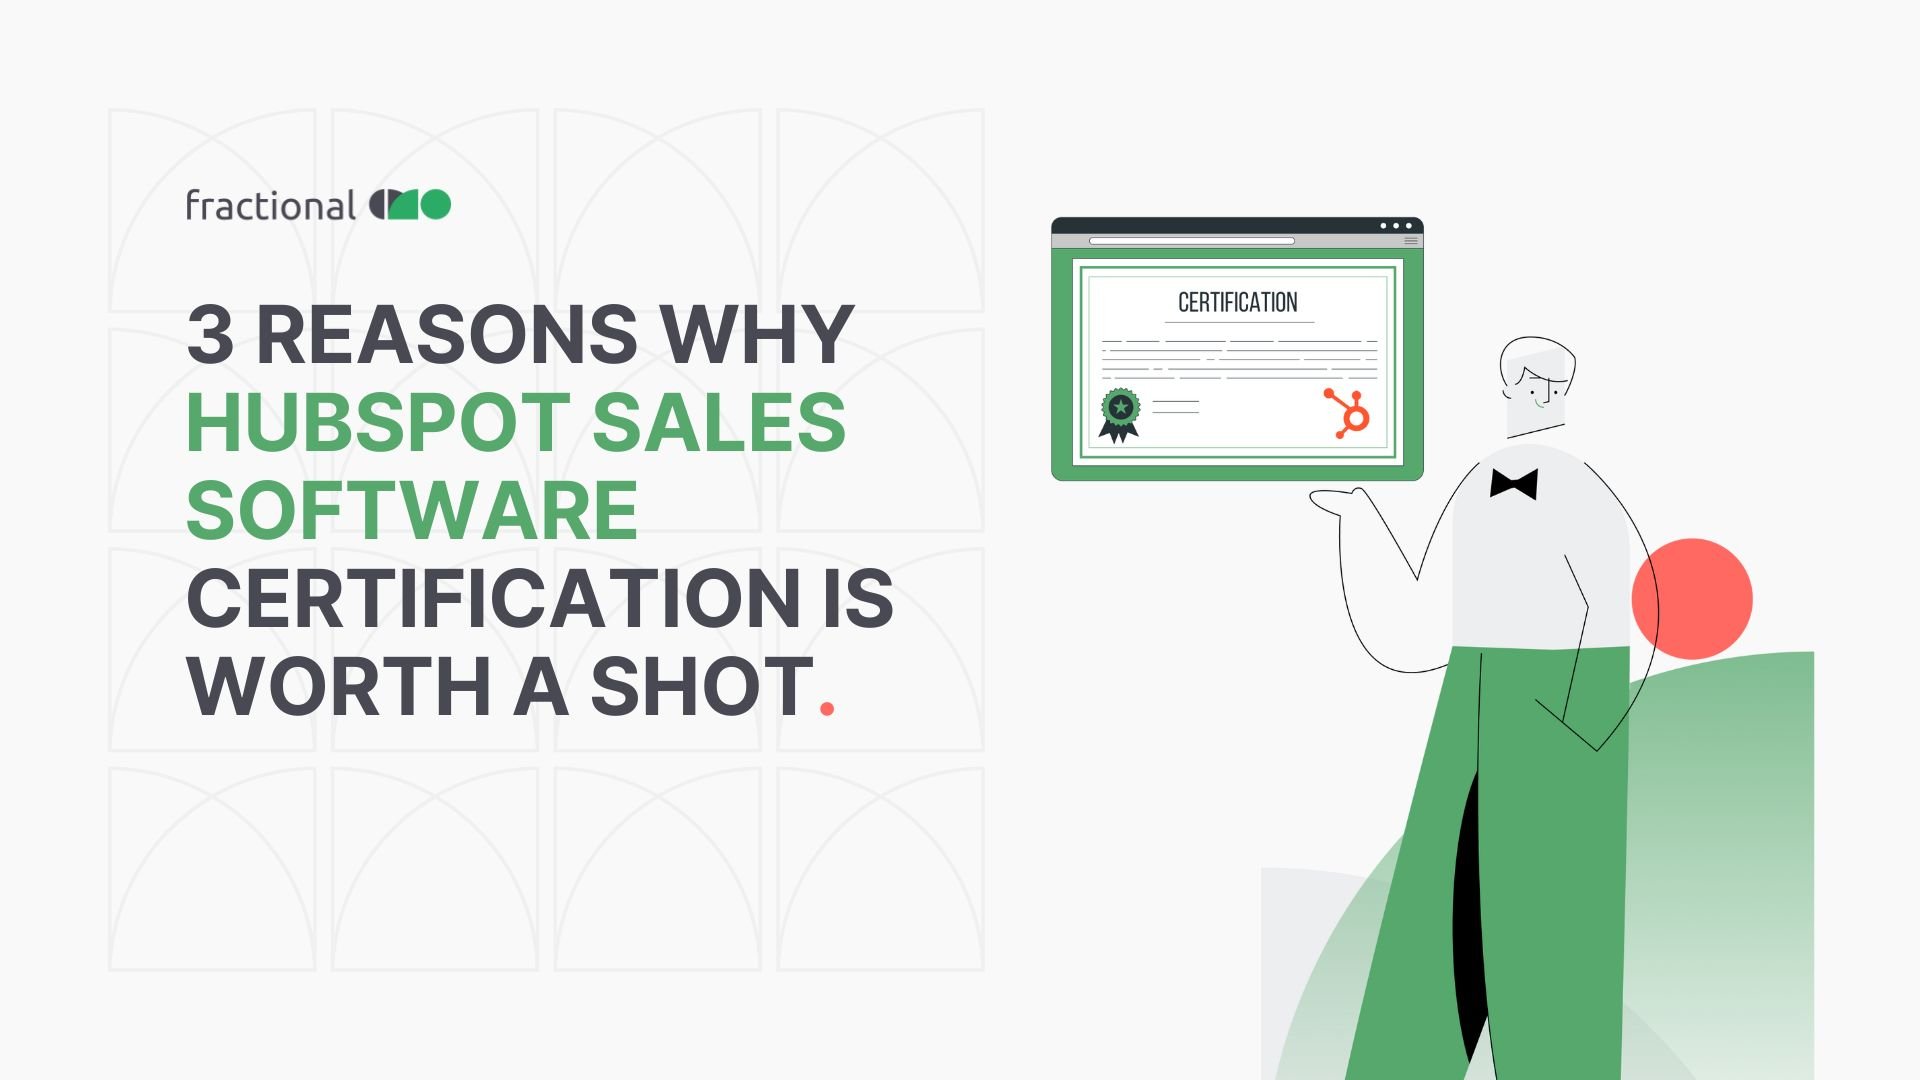 3 Reasons Why Hubspot Sales Software Certification Is Worth A Shot.